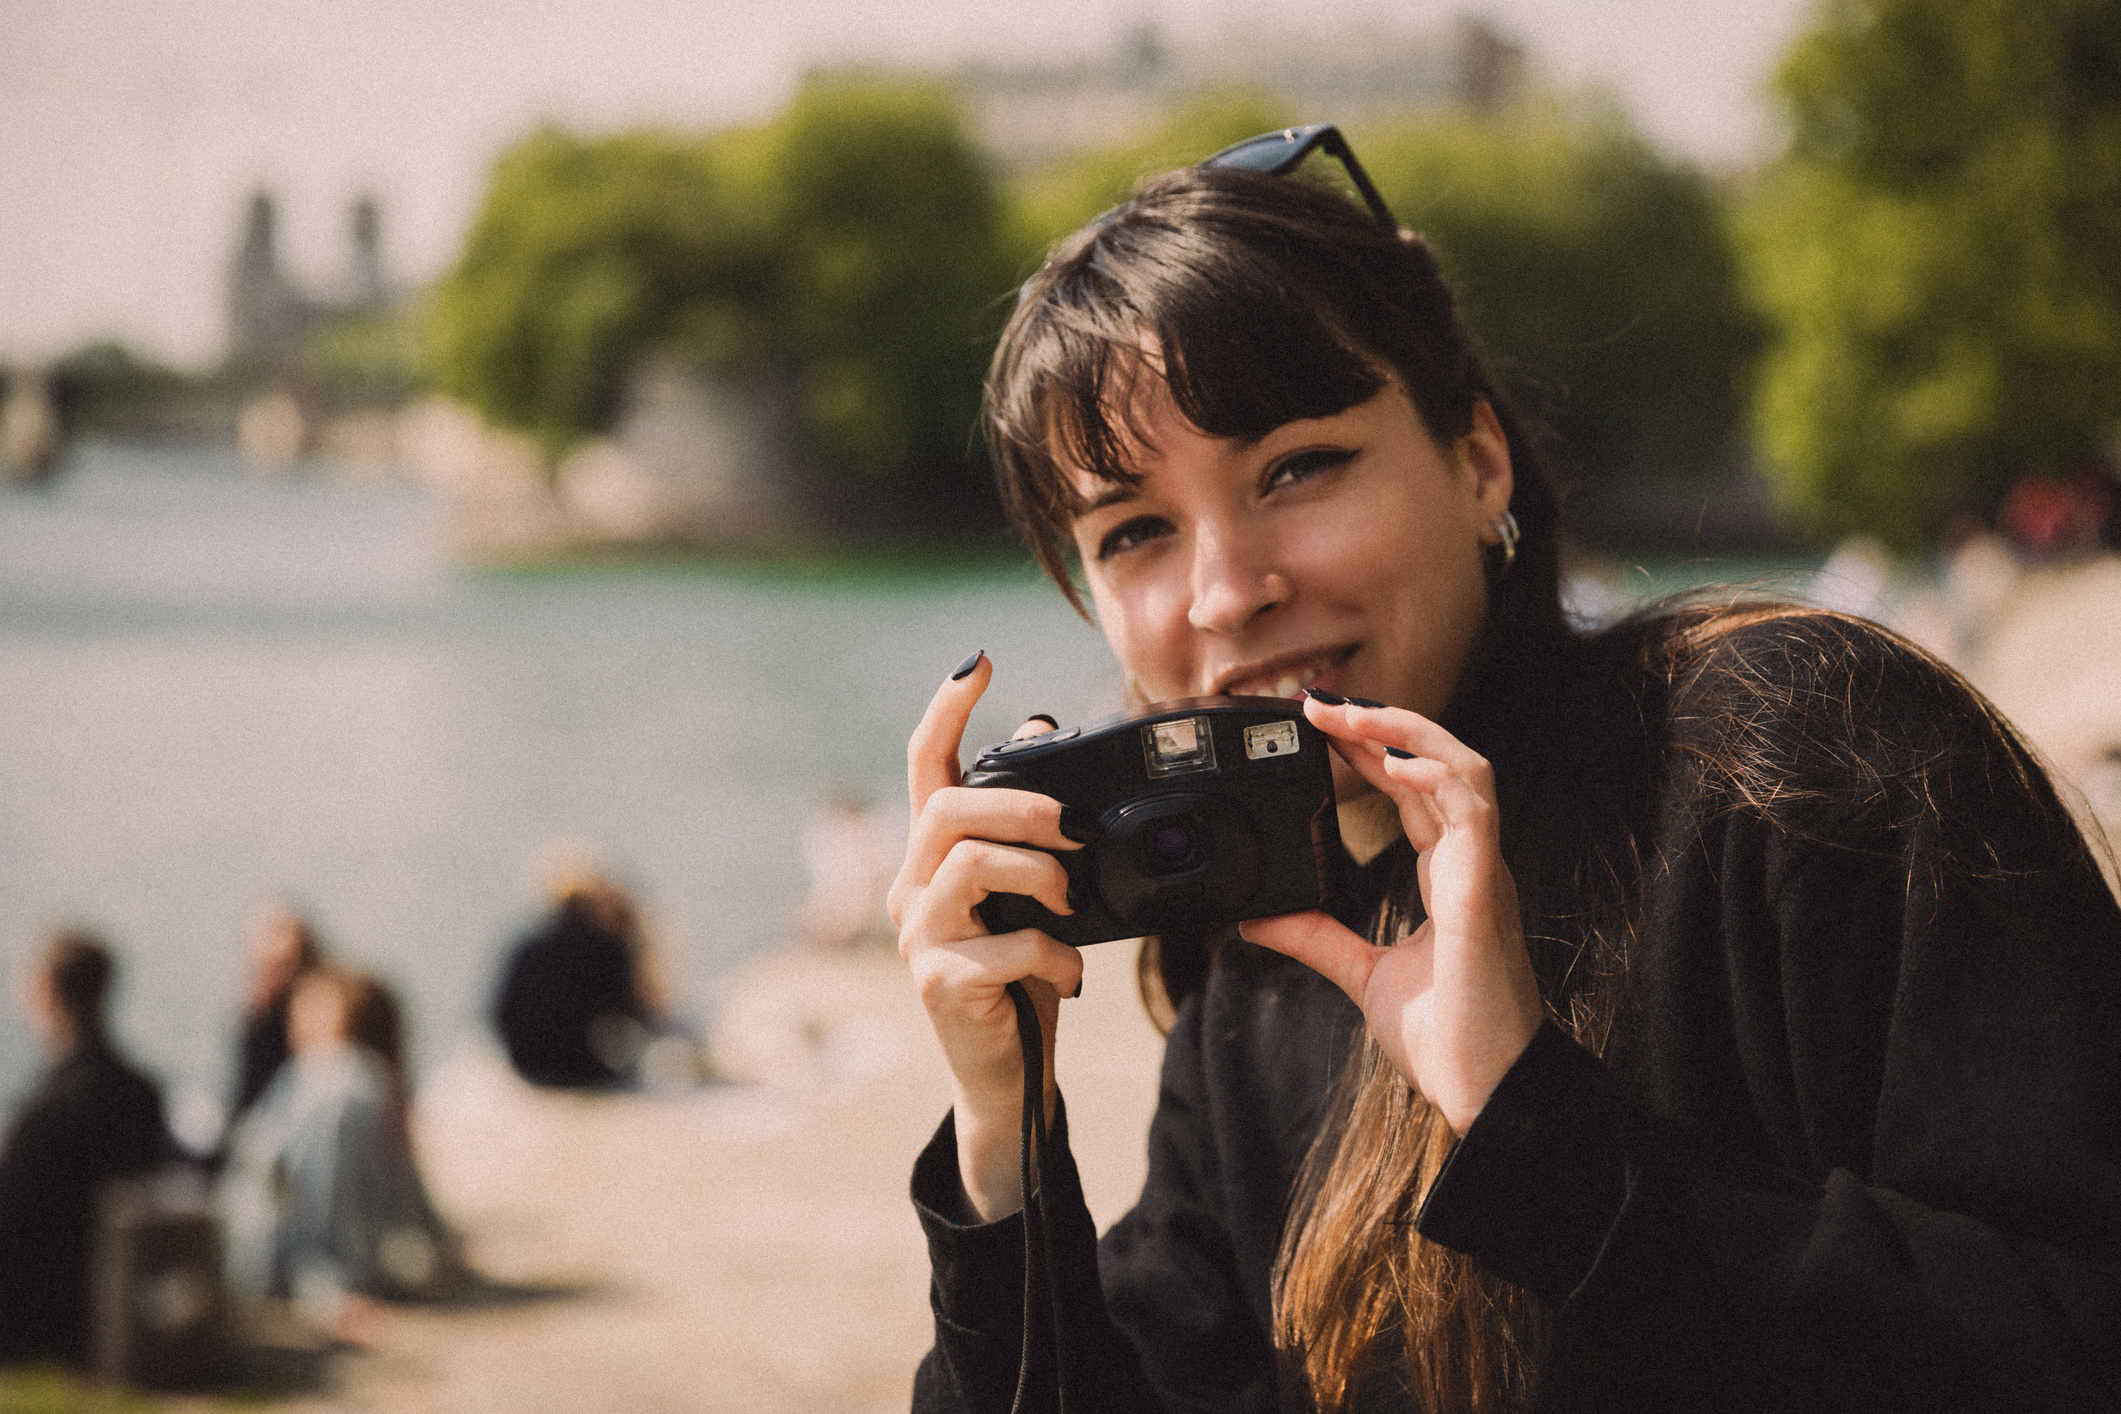 Woman smiling at the camera holding a camera, outdoors with people in the background